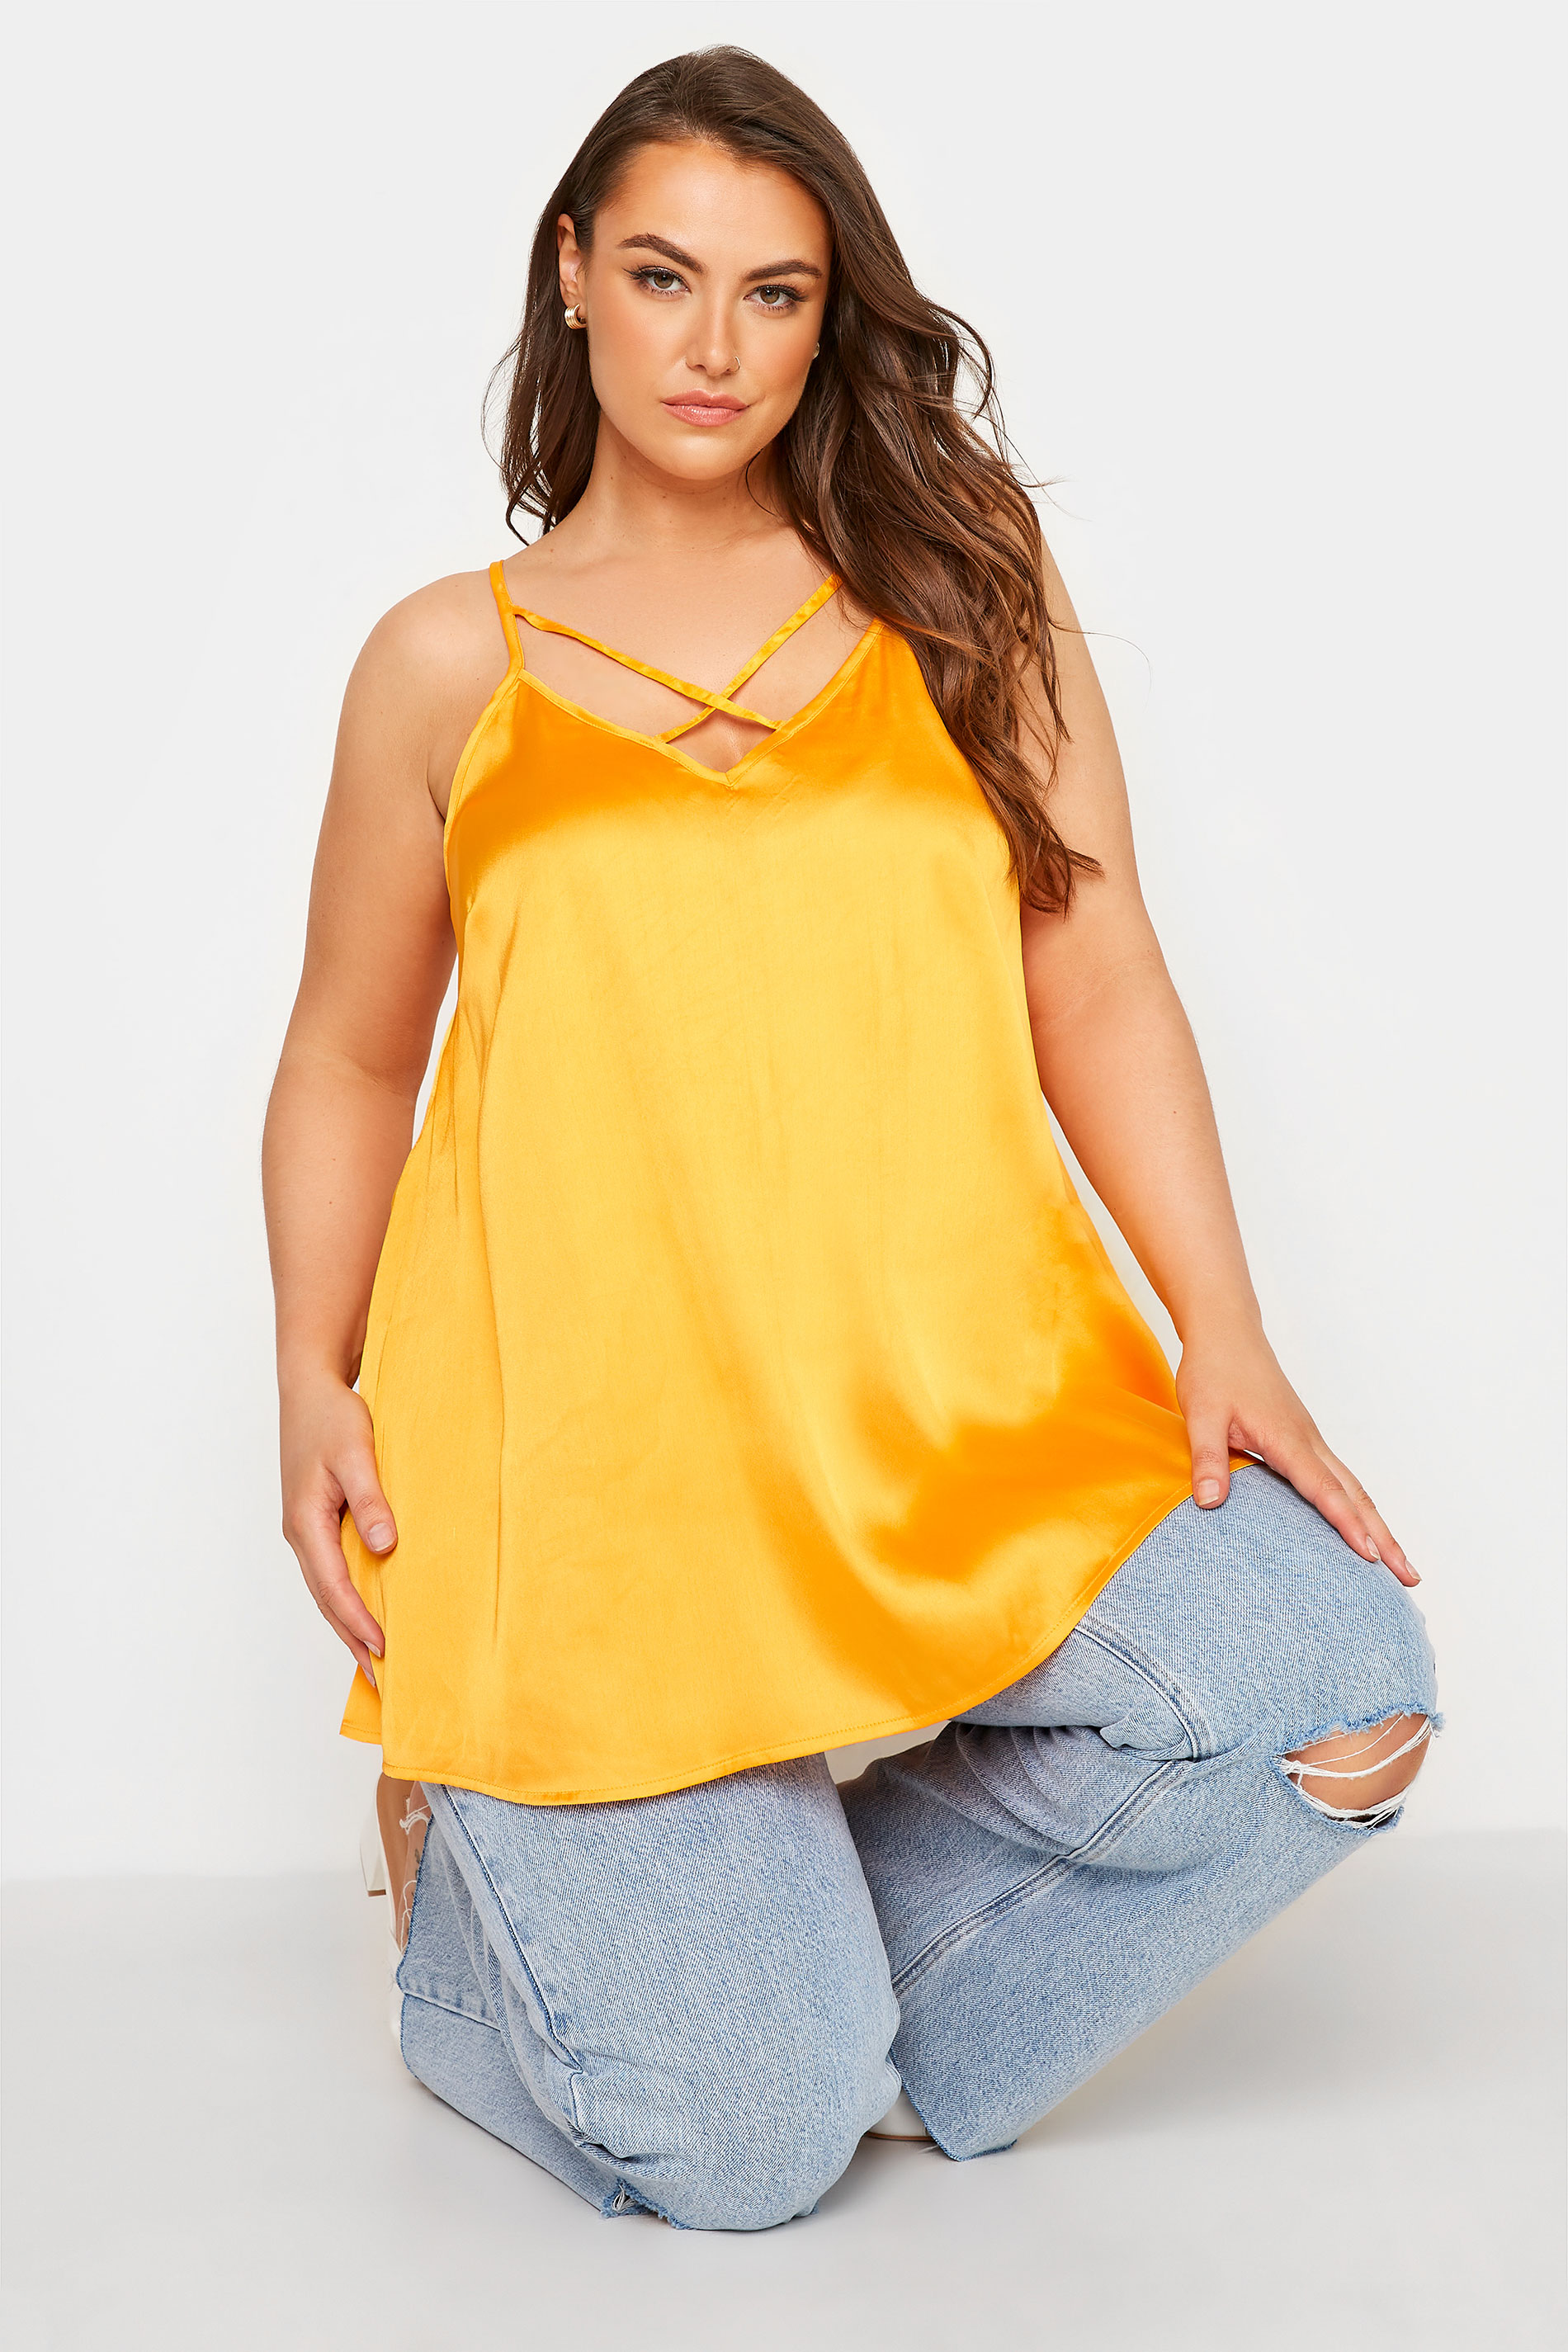 LIMITED COLLECTION Curve Bright Yellow Satin Cami Top_A.jpg